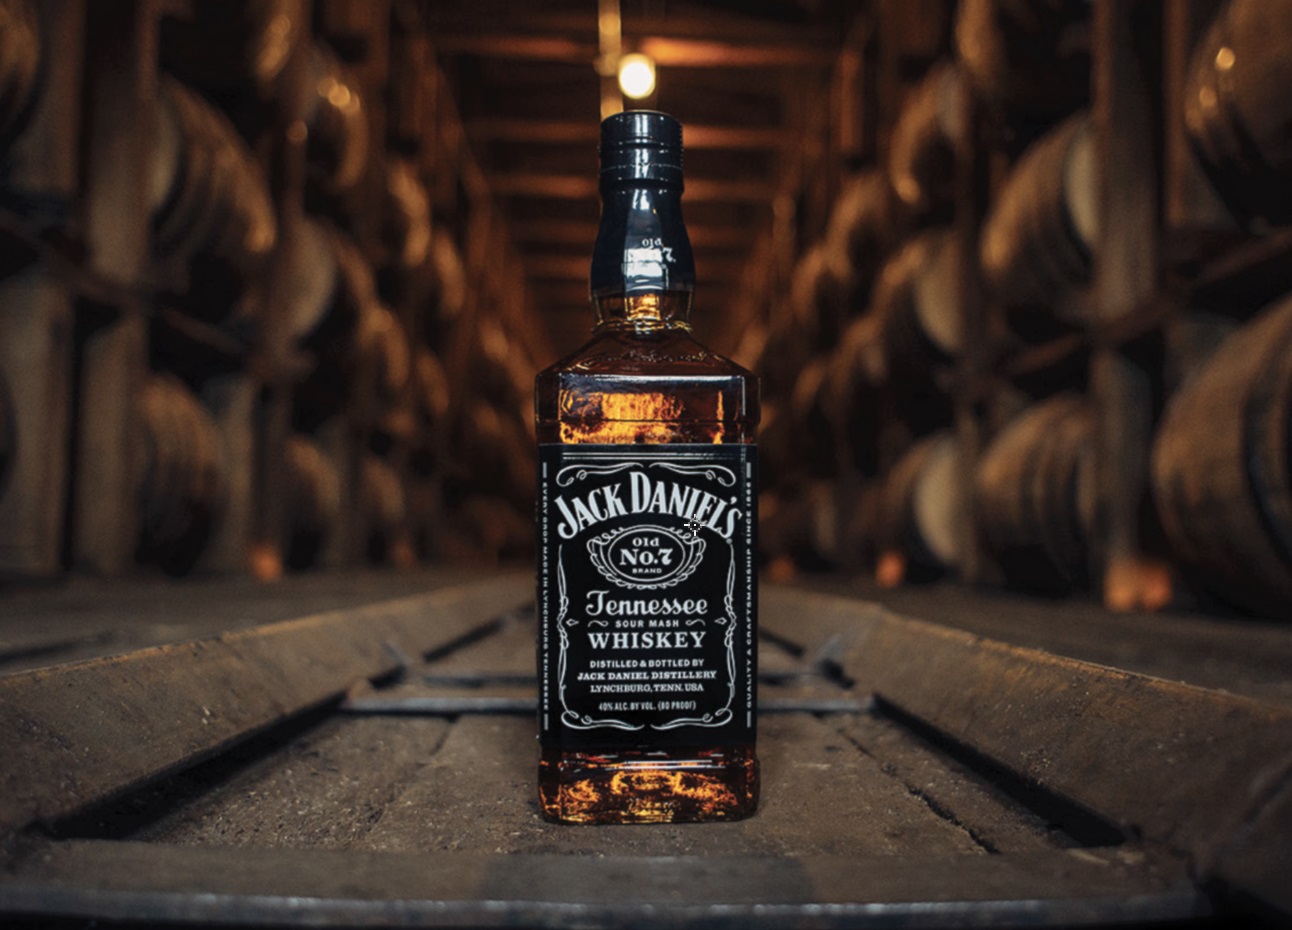 The Jack Daniel’s ‘Bar Slide’ competition is visiting locations across the country from this month.